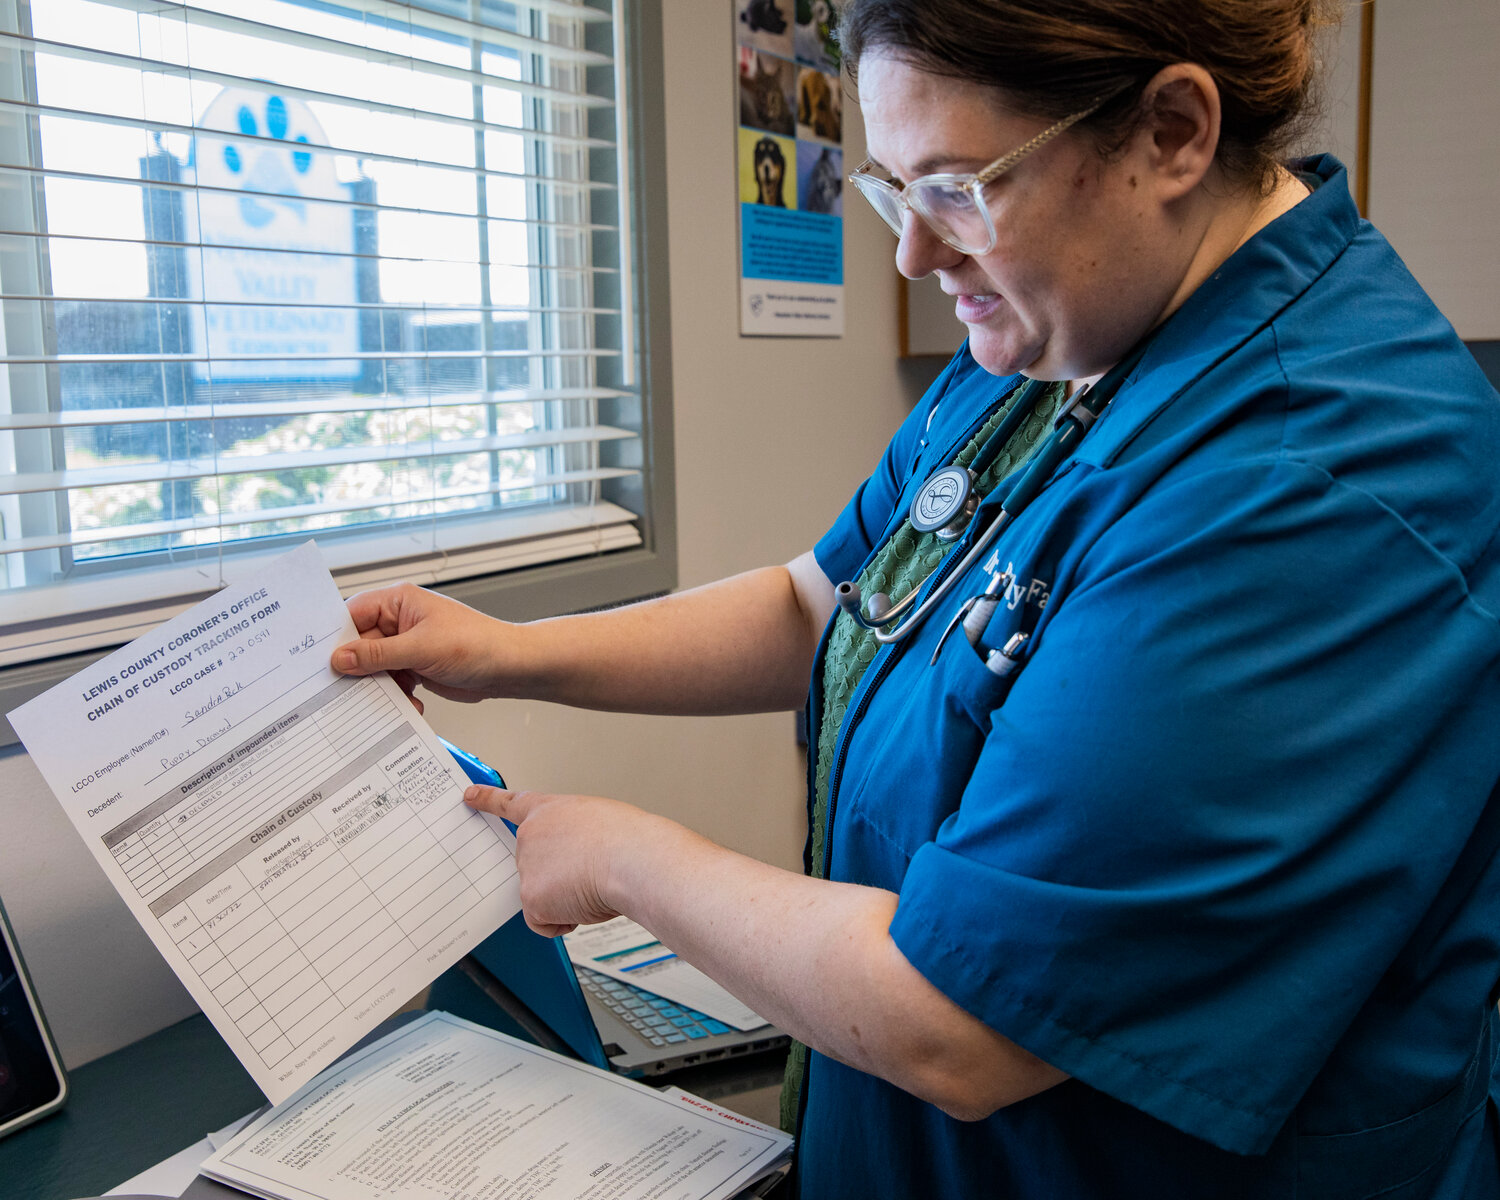 Dr. Brandy Fay shows the chain of custody form provided to her by the Lewis County Sheriff’s Office pertaining to the body of Buzzo the dog during an interview in her office in Chehalis on Saturday, April 29.